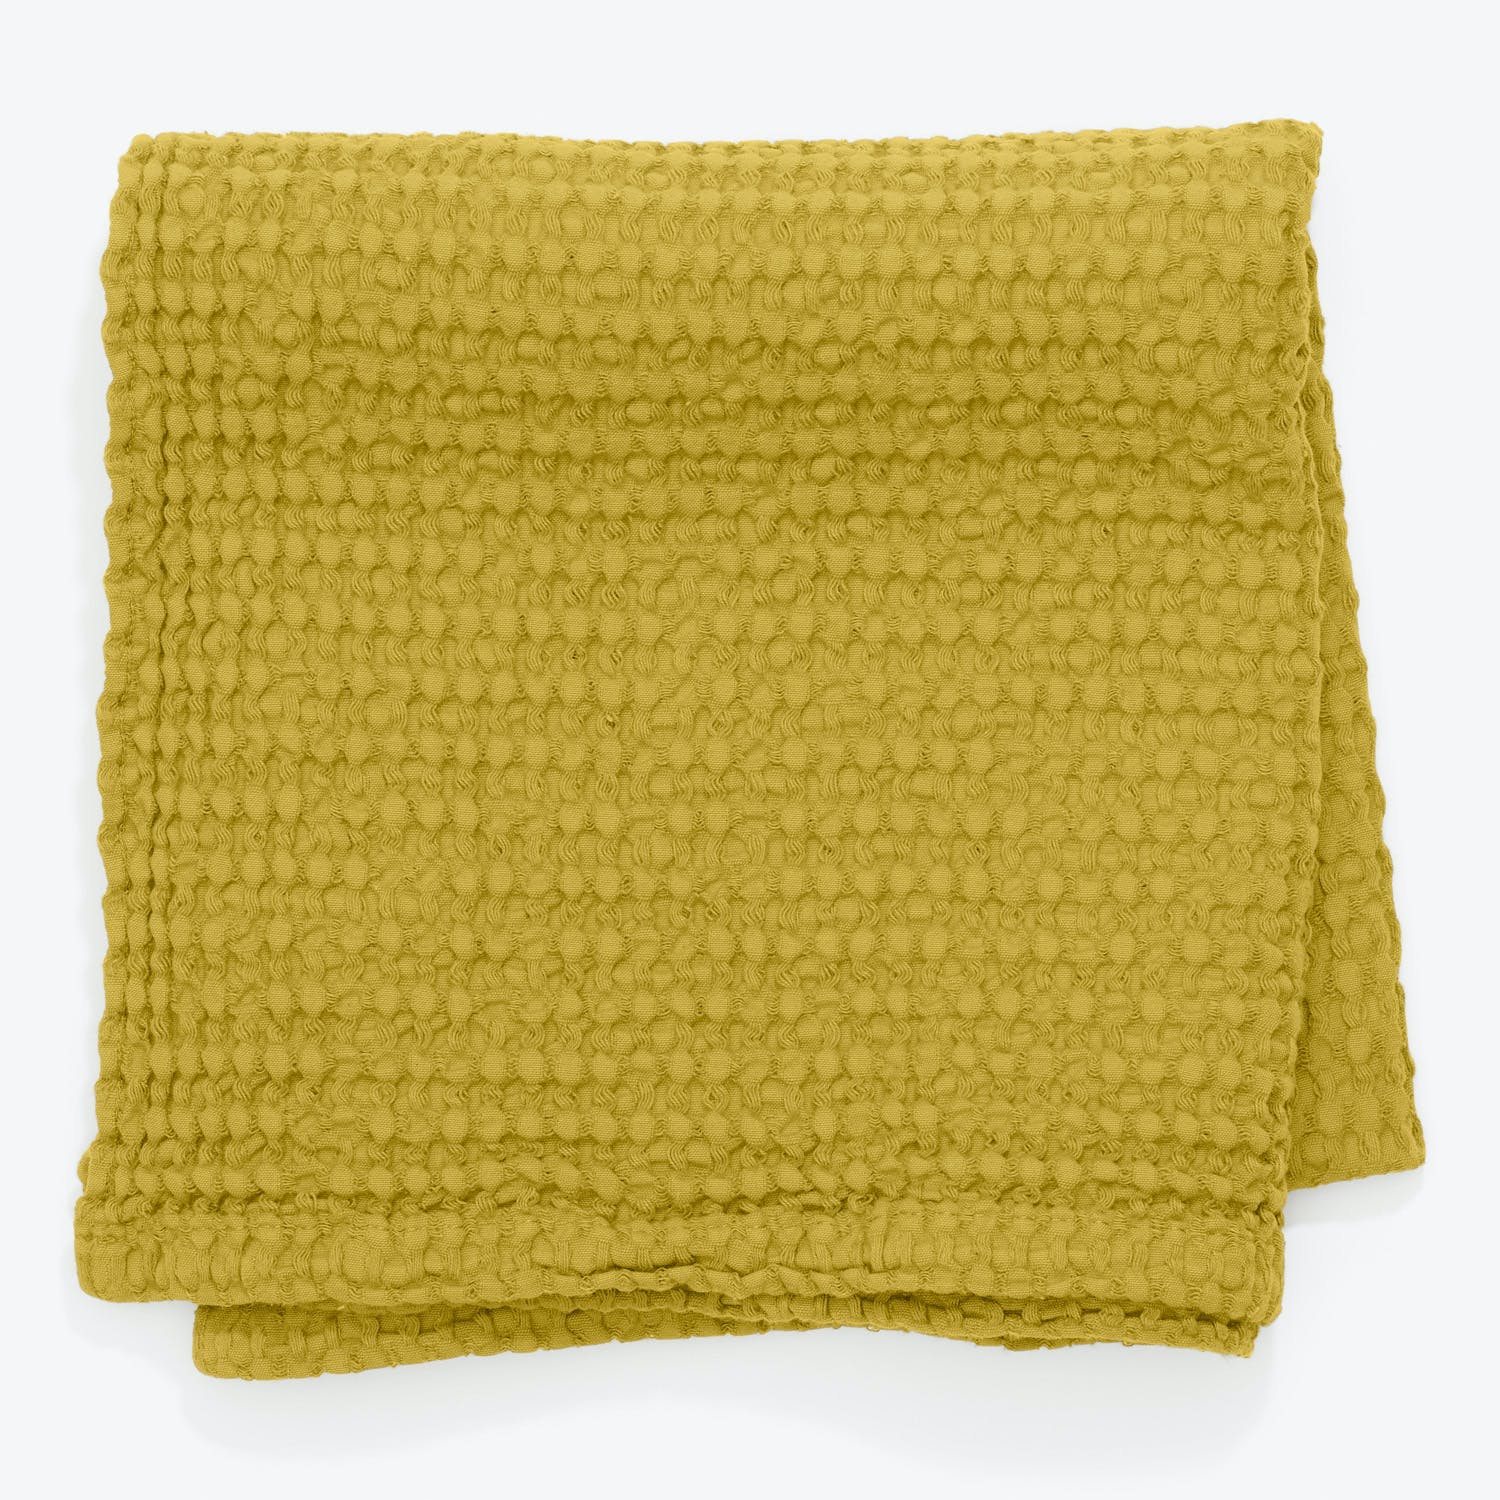 Vibrant green towel/blanket with soft, textured pattern on white background.